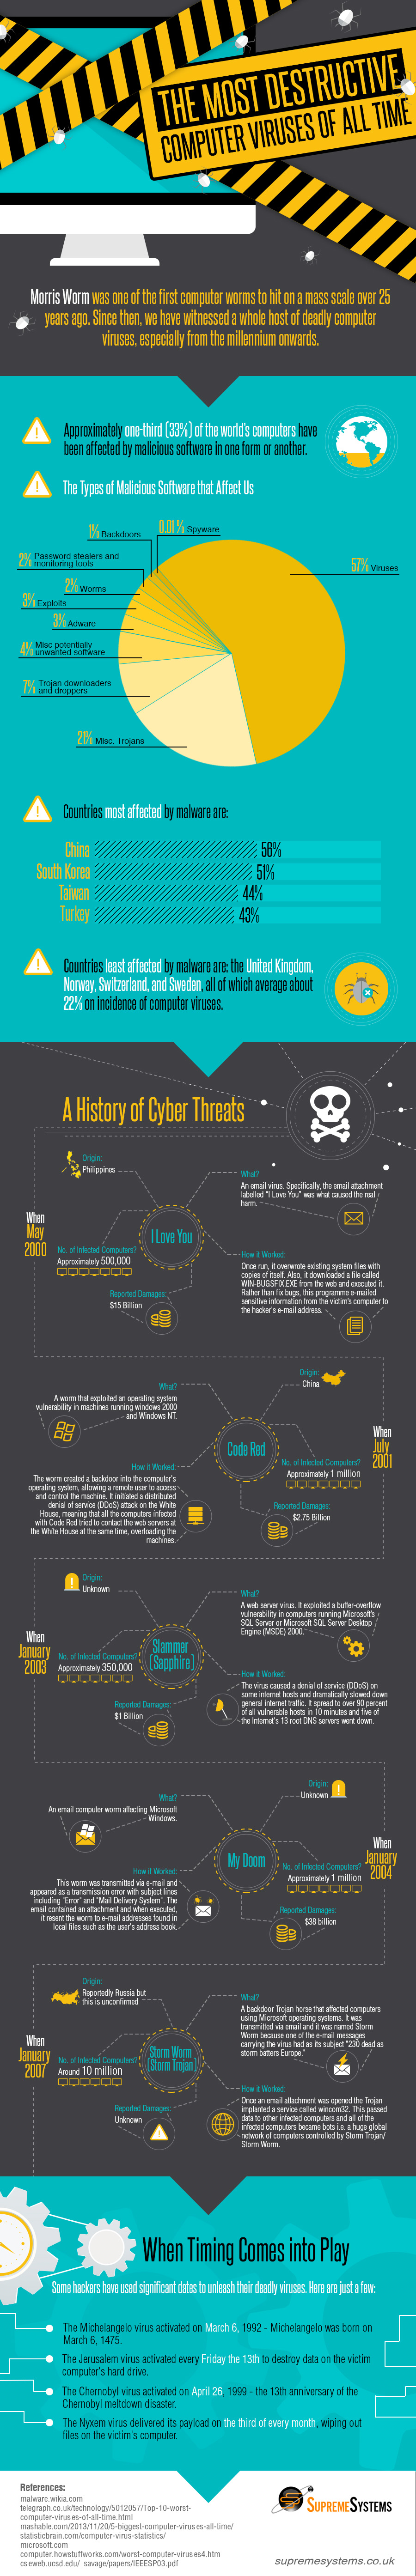 Infographic of the most destructive computer viruses